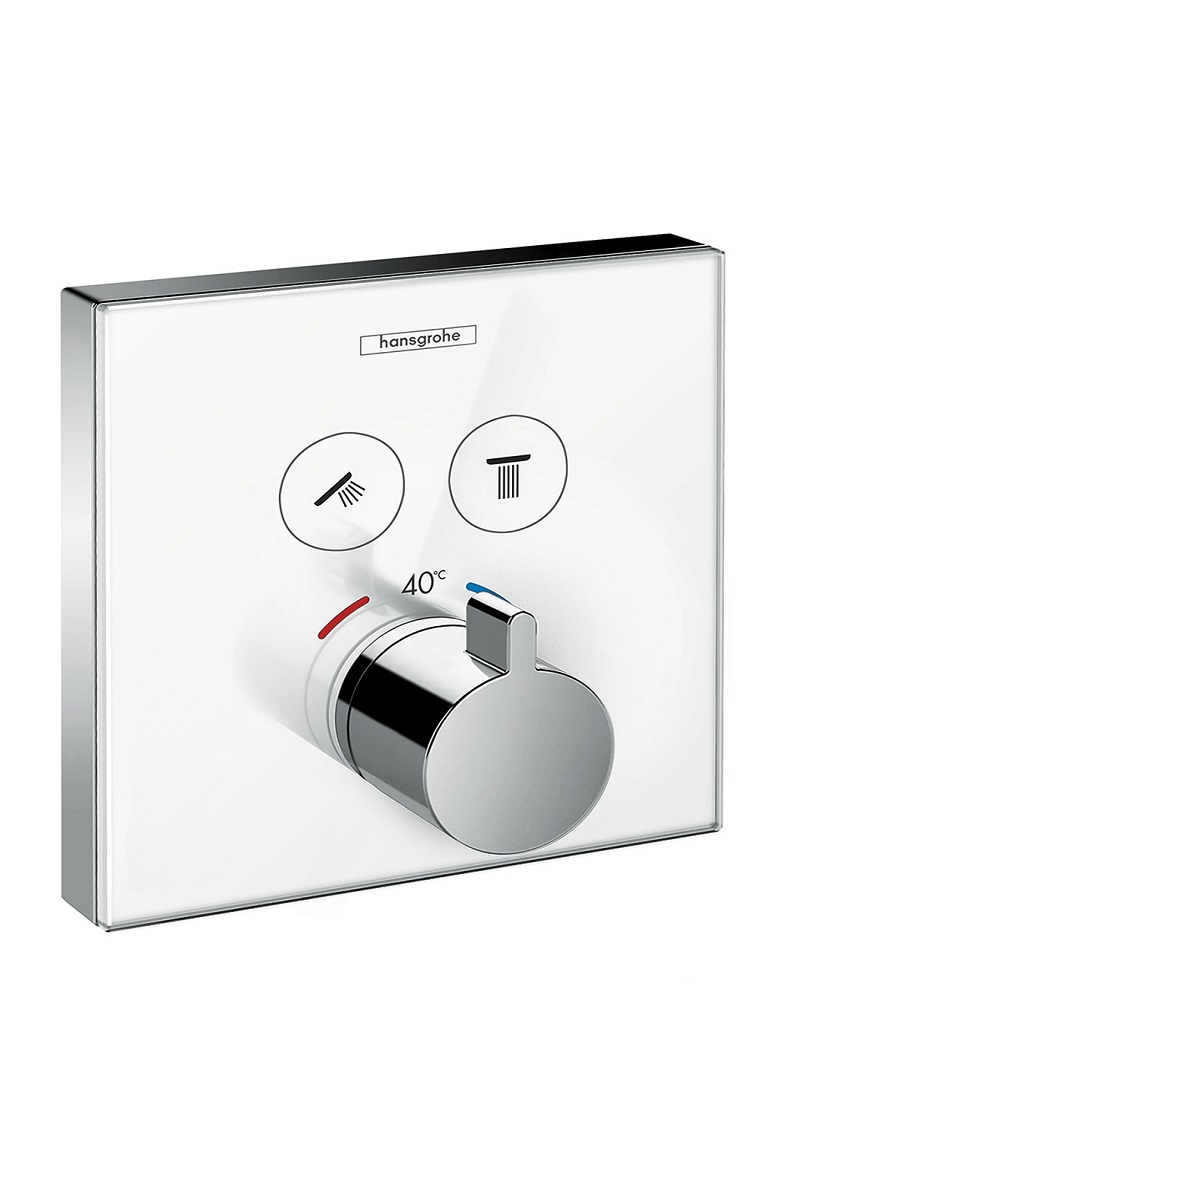 hansgrohe showerselect thermostatic mixer instructions